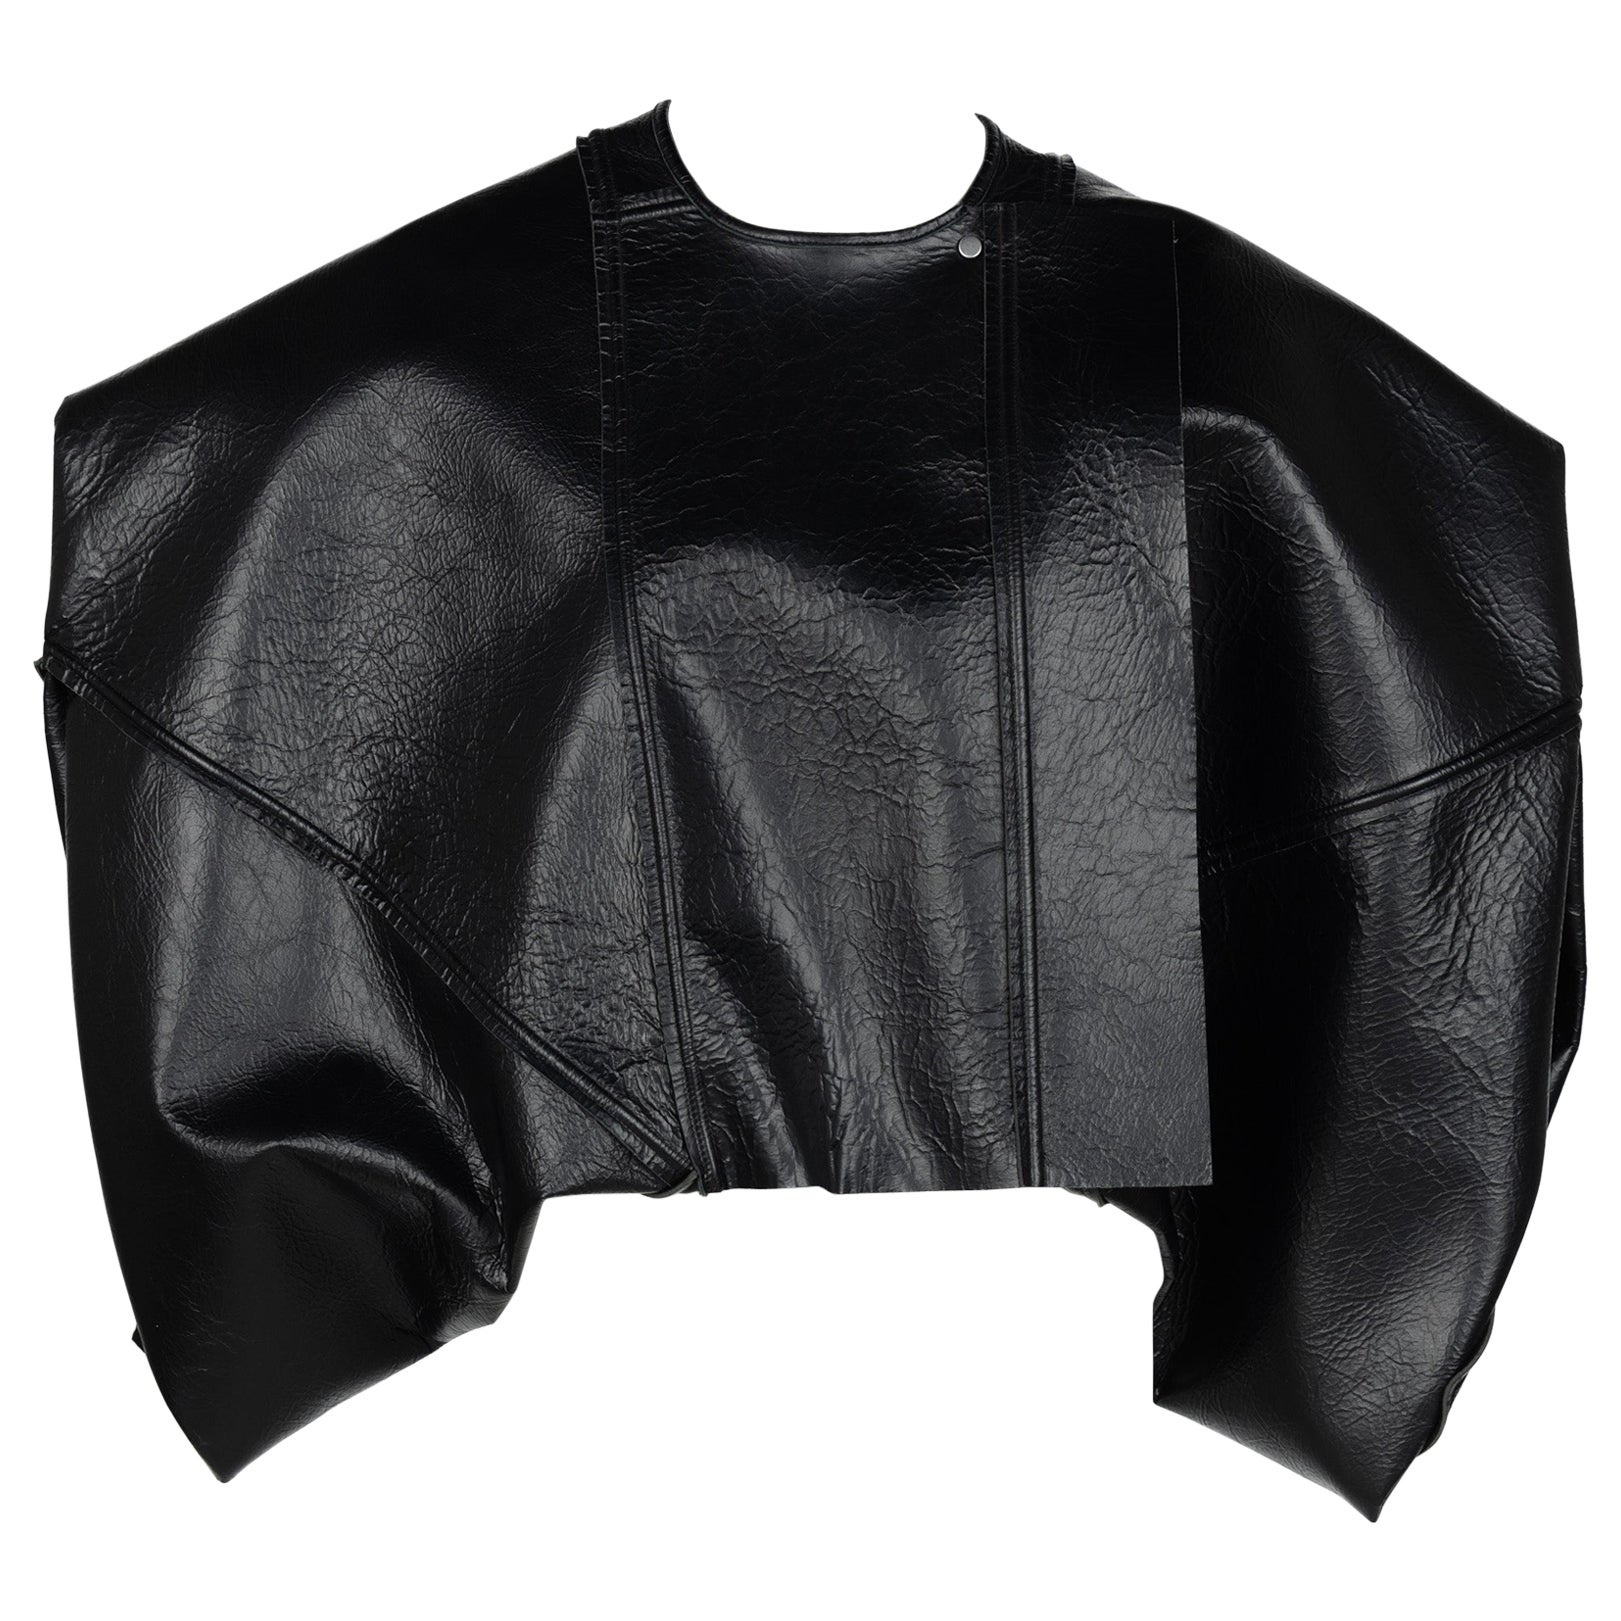 Rick Owens Lilies Sculptural Black Leather Jacket New Tags For Sale